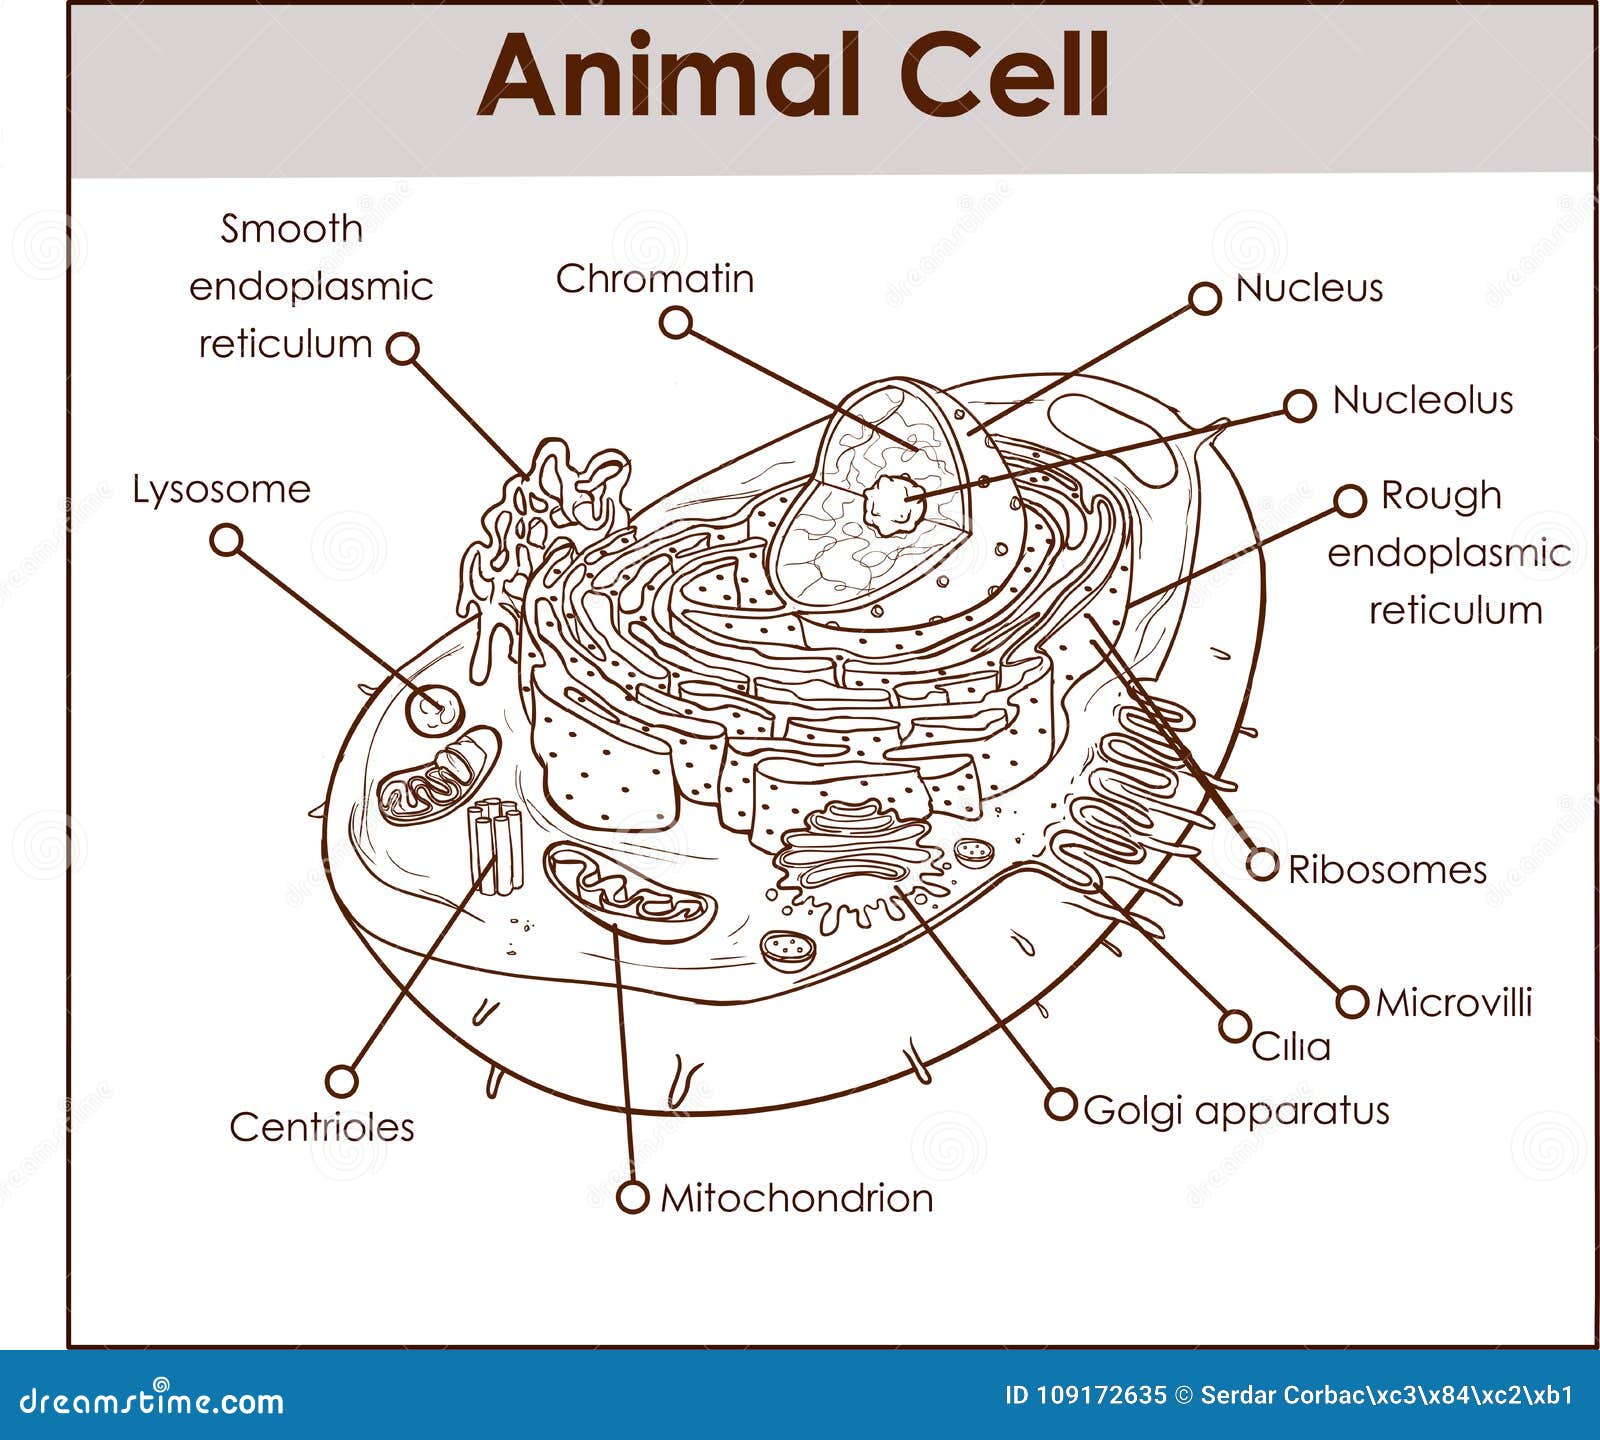 How to Draw Animal Cell - YouTube